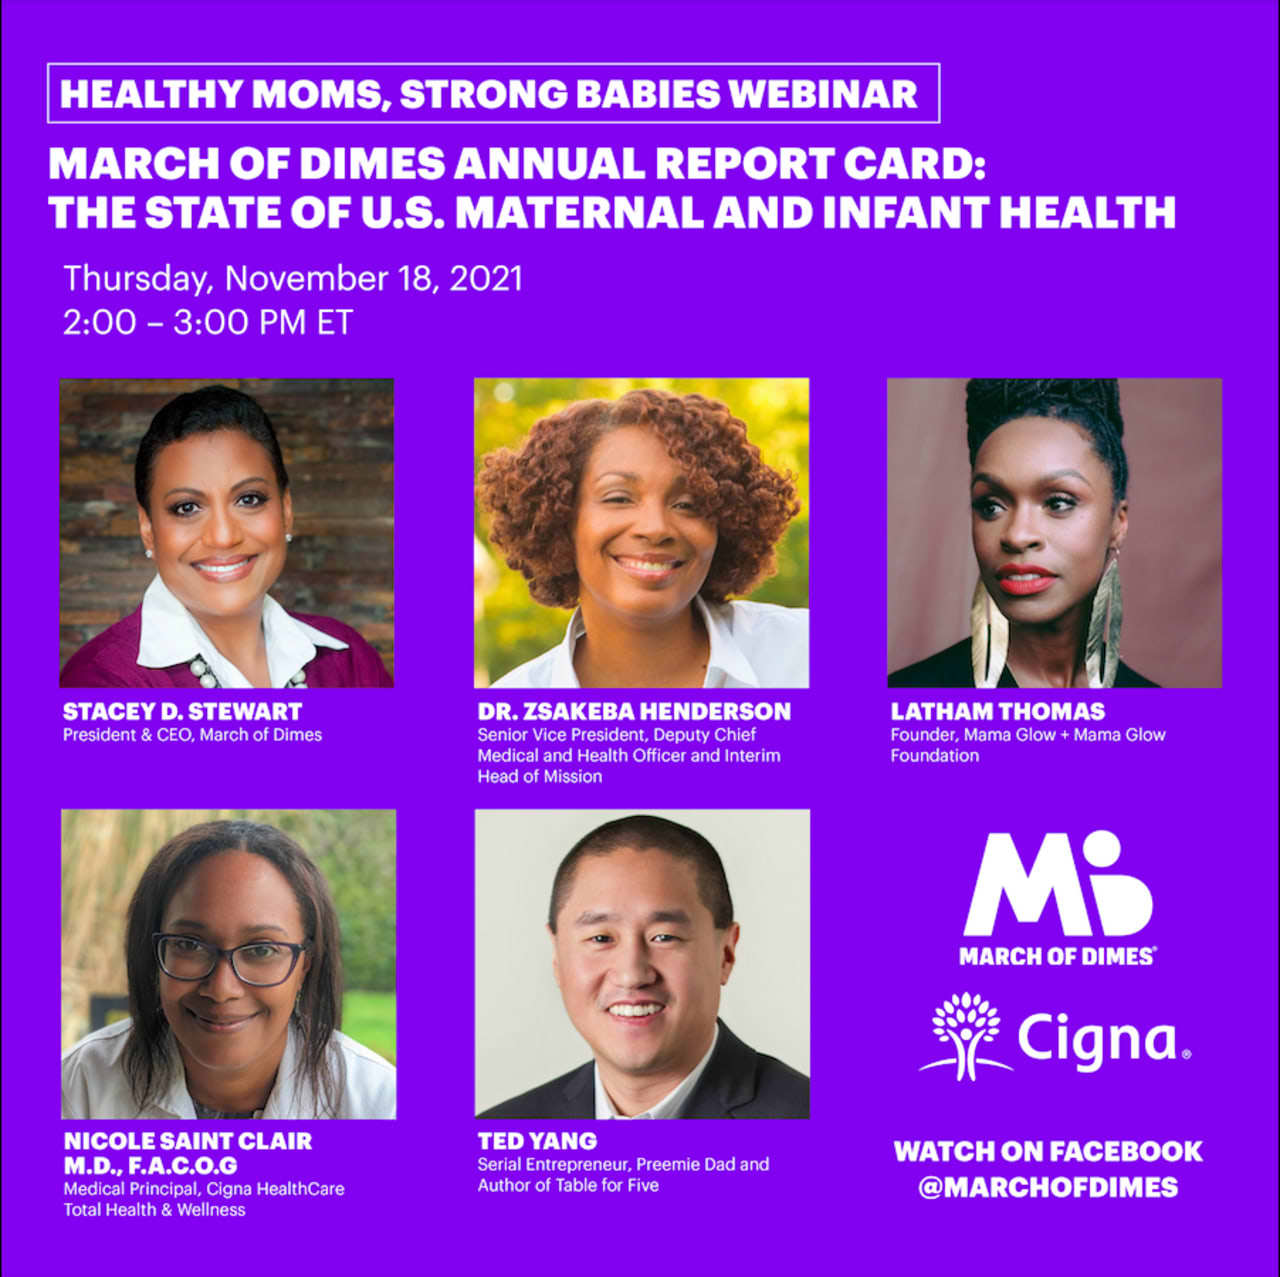 You can catch the webinar "Healthy Moms, Strong Babies" live at facebook.com/marchofdimes.